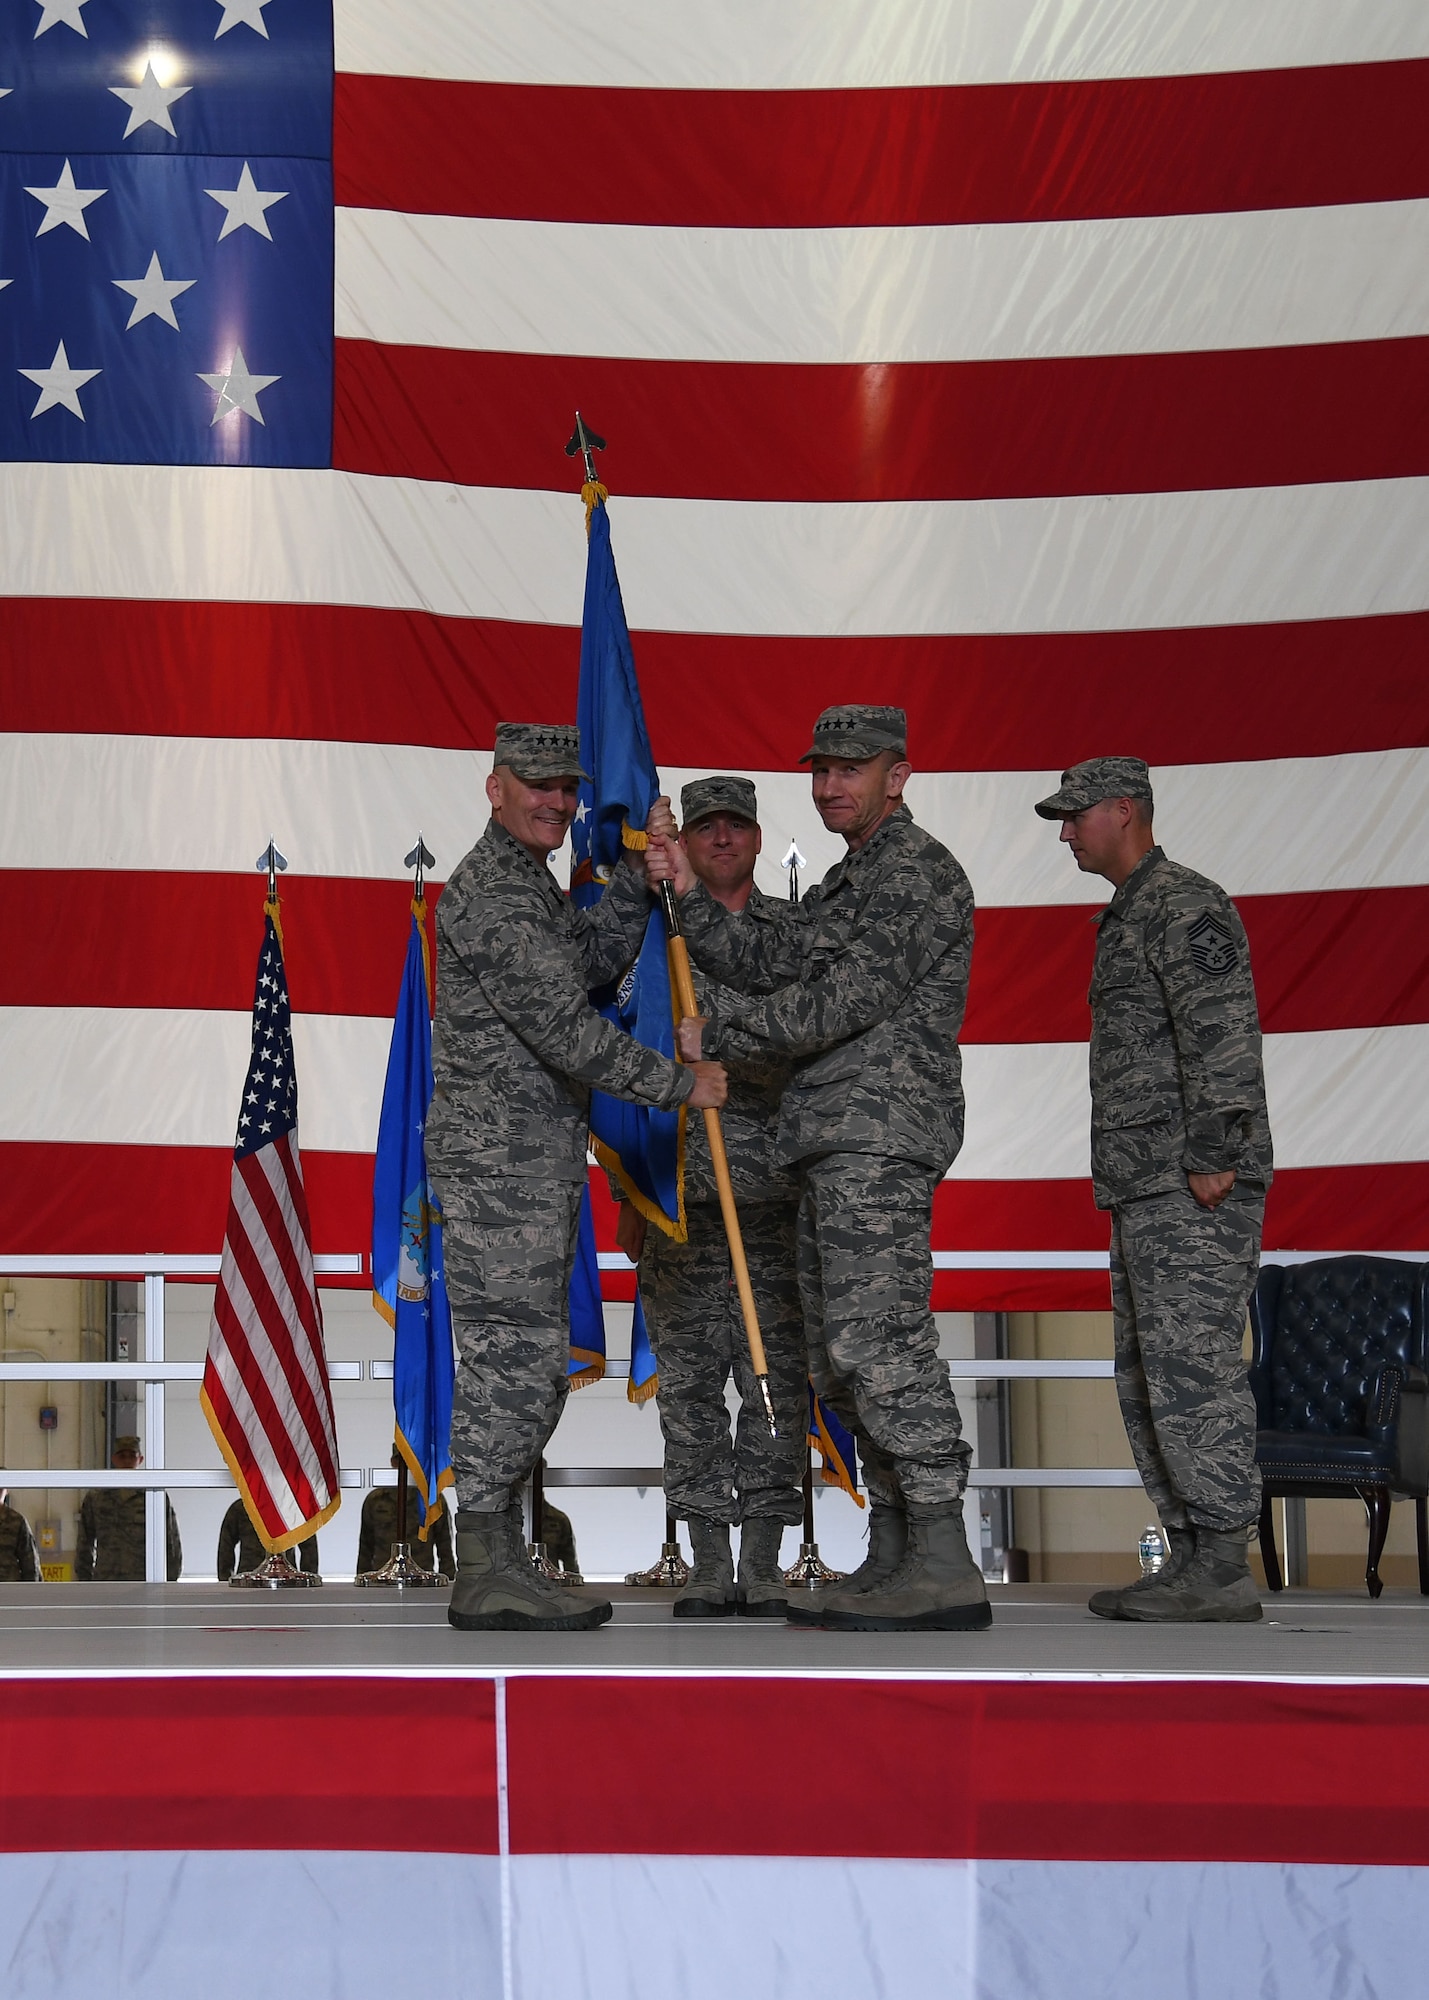 Gen. Mike Holmes, Air Combat commander, right, receives the guidon from Gen. Carlton Everhart, Air Mobility commander, left, during a realignment ceremony at Grand Forks Air Force Base, N.D., June 15, 2017. Passing the guidon symbolizes the change of the 319th Air Base Wing from Air Mobility Command, to Air Combat Command. (U.S. Air Force photo by Airman 1st Class Elora McCutcheon)